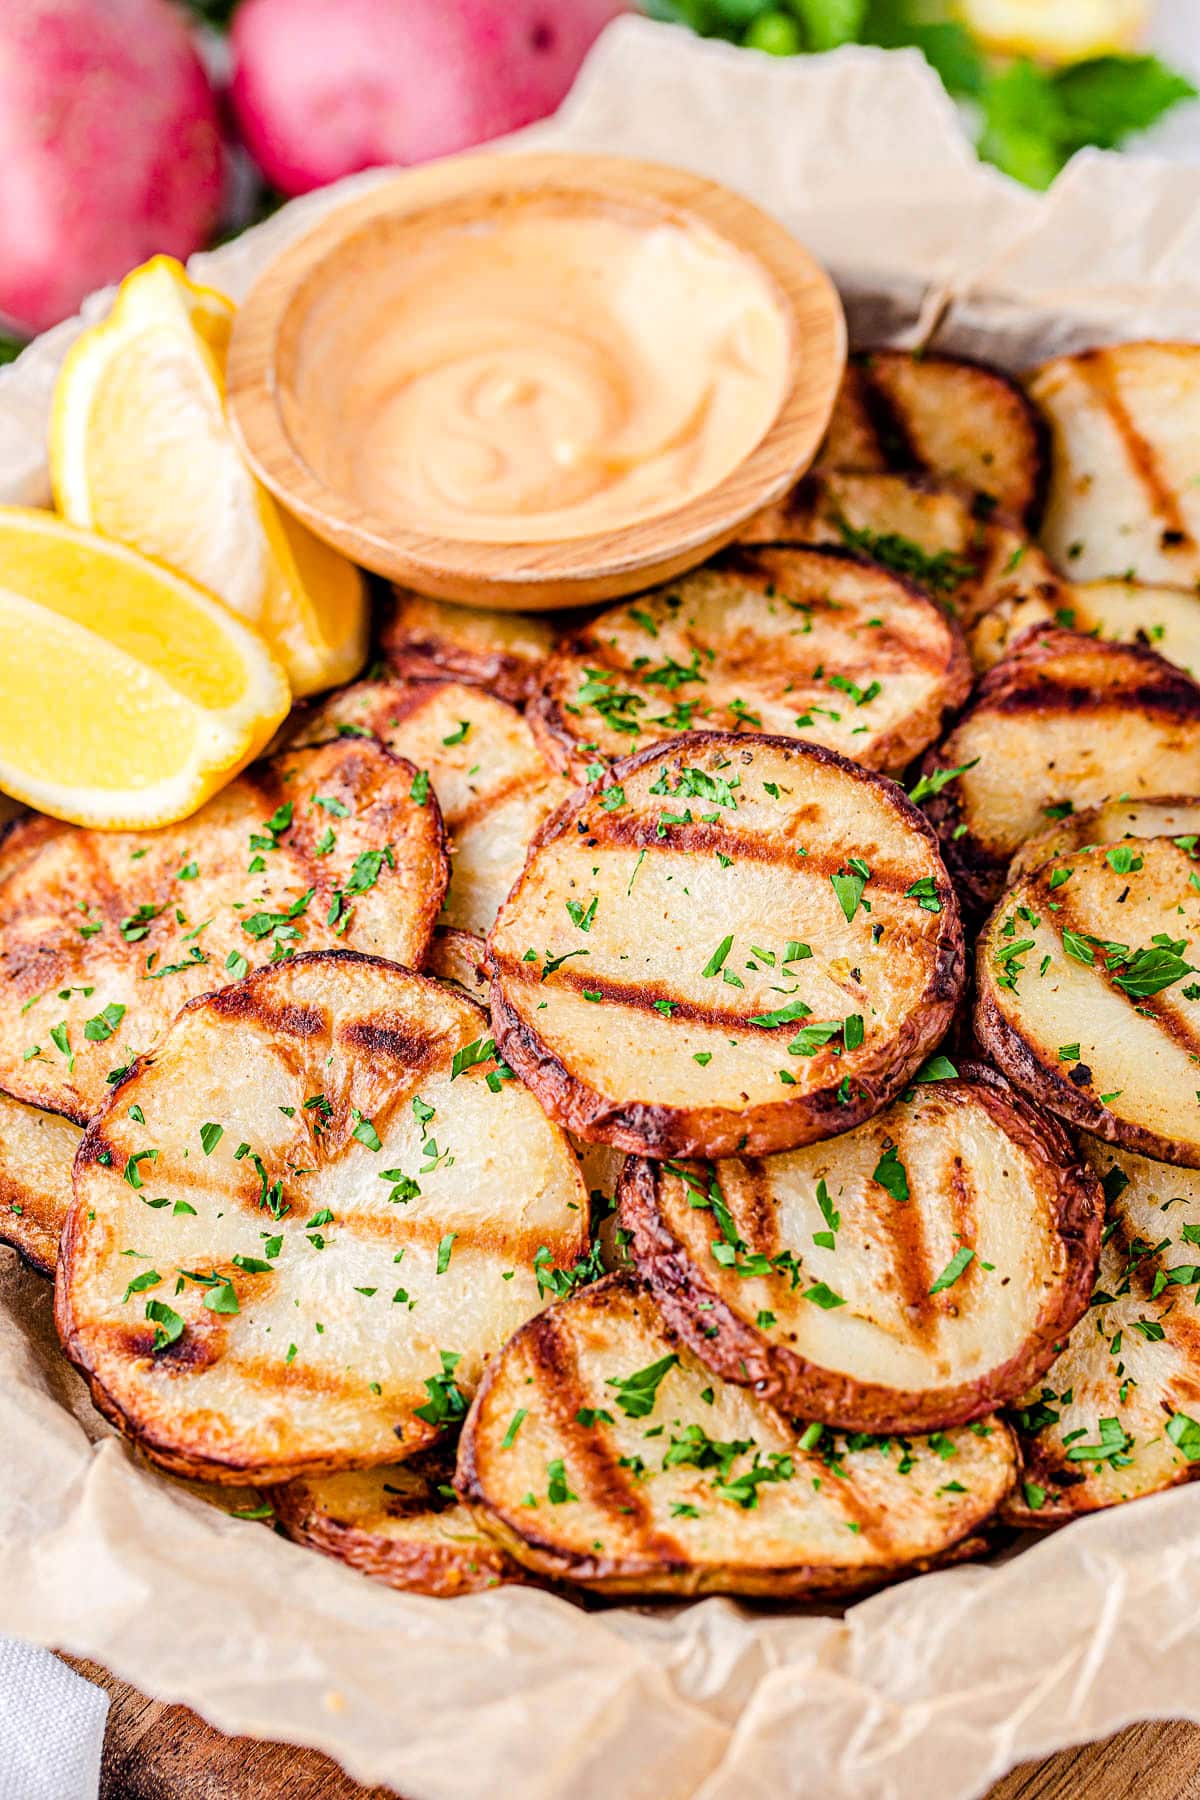 grilled potatoes served with spicy mayo dip and lemon wedges on wood tray.